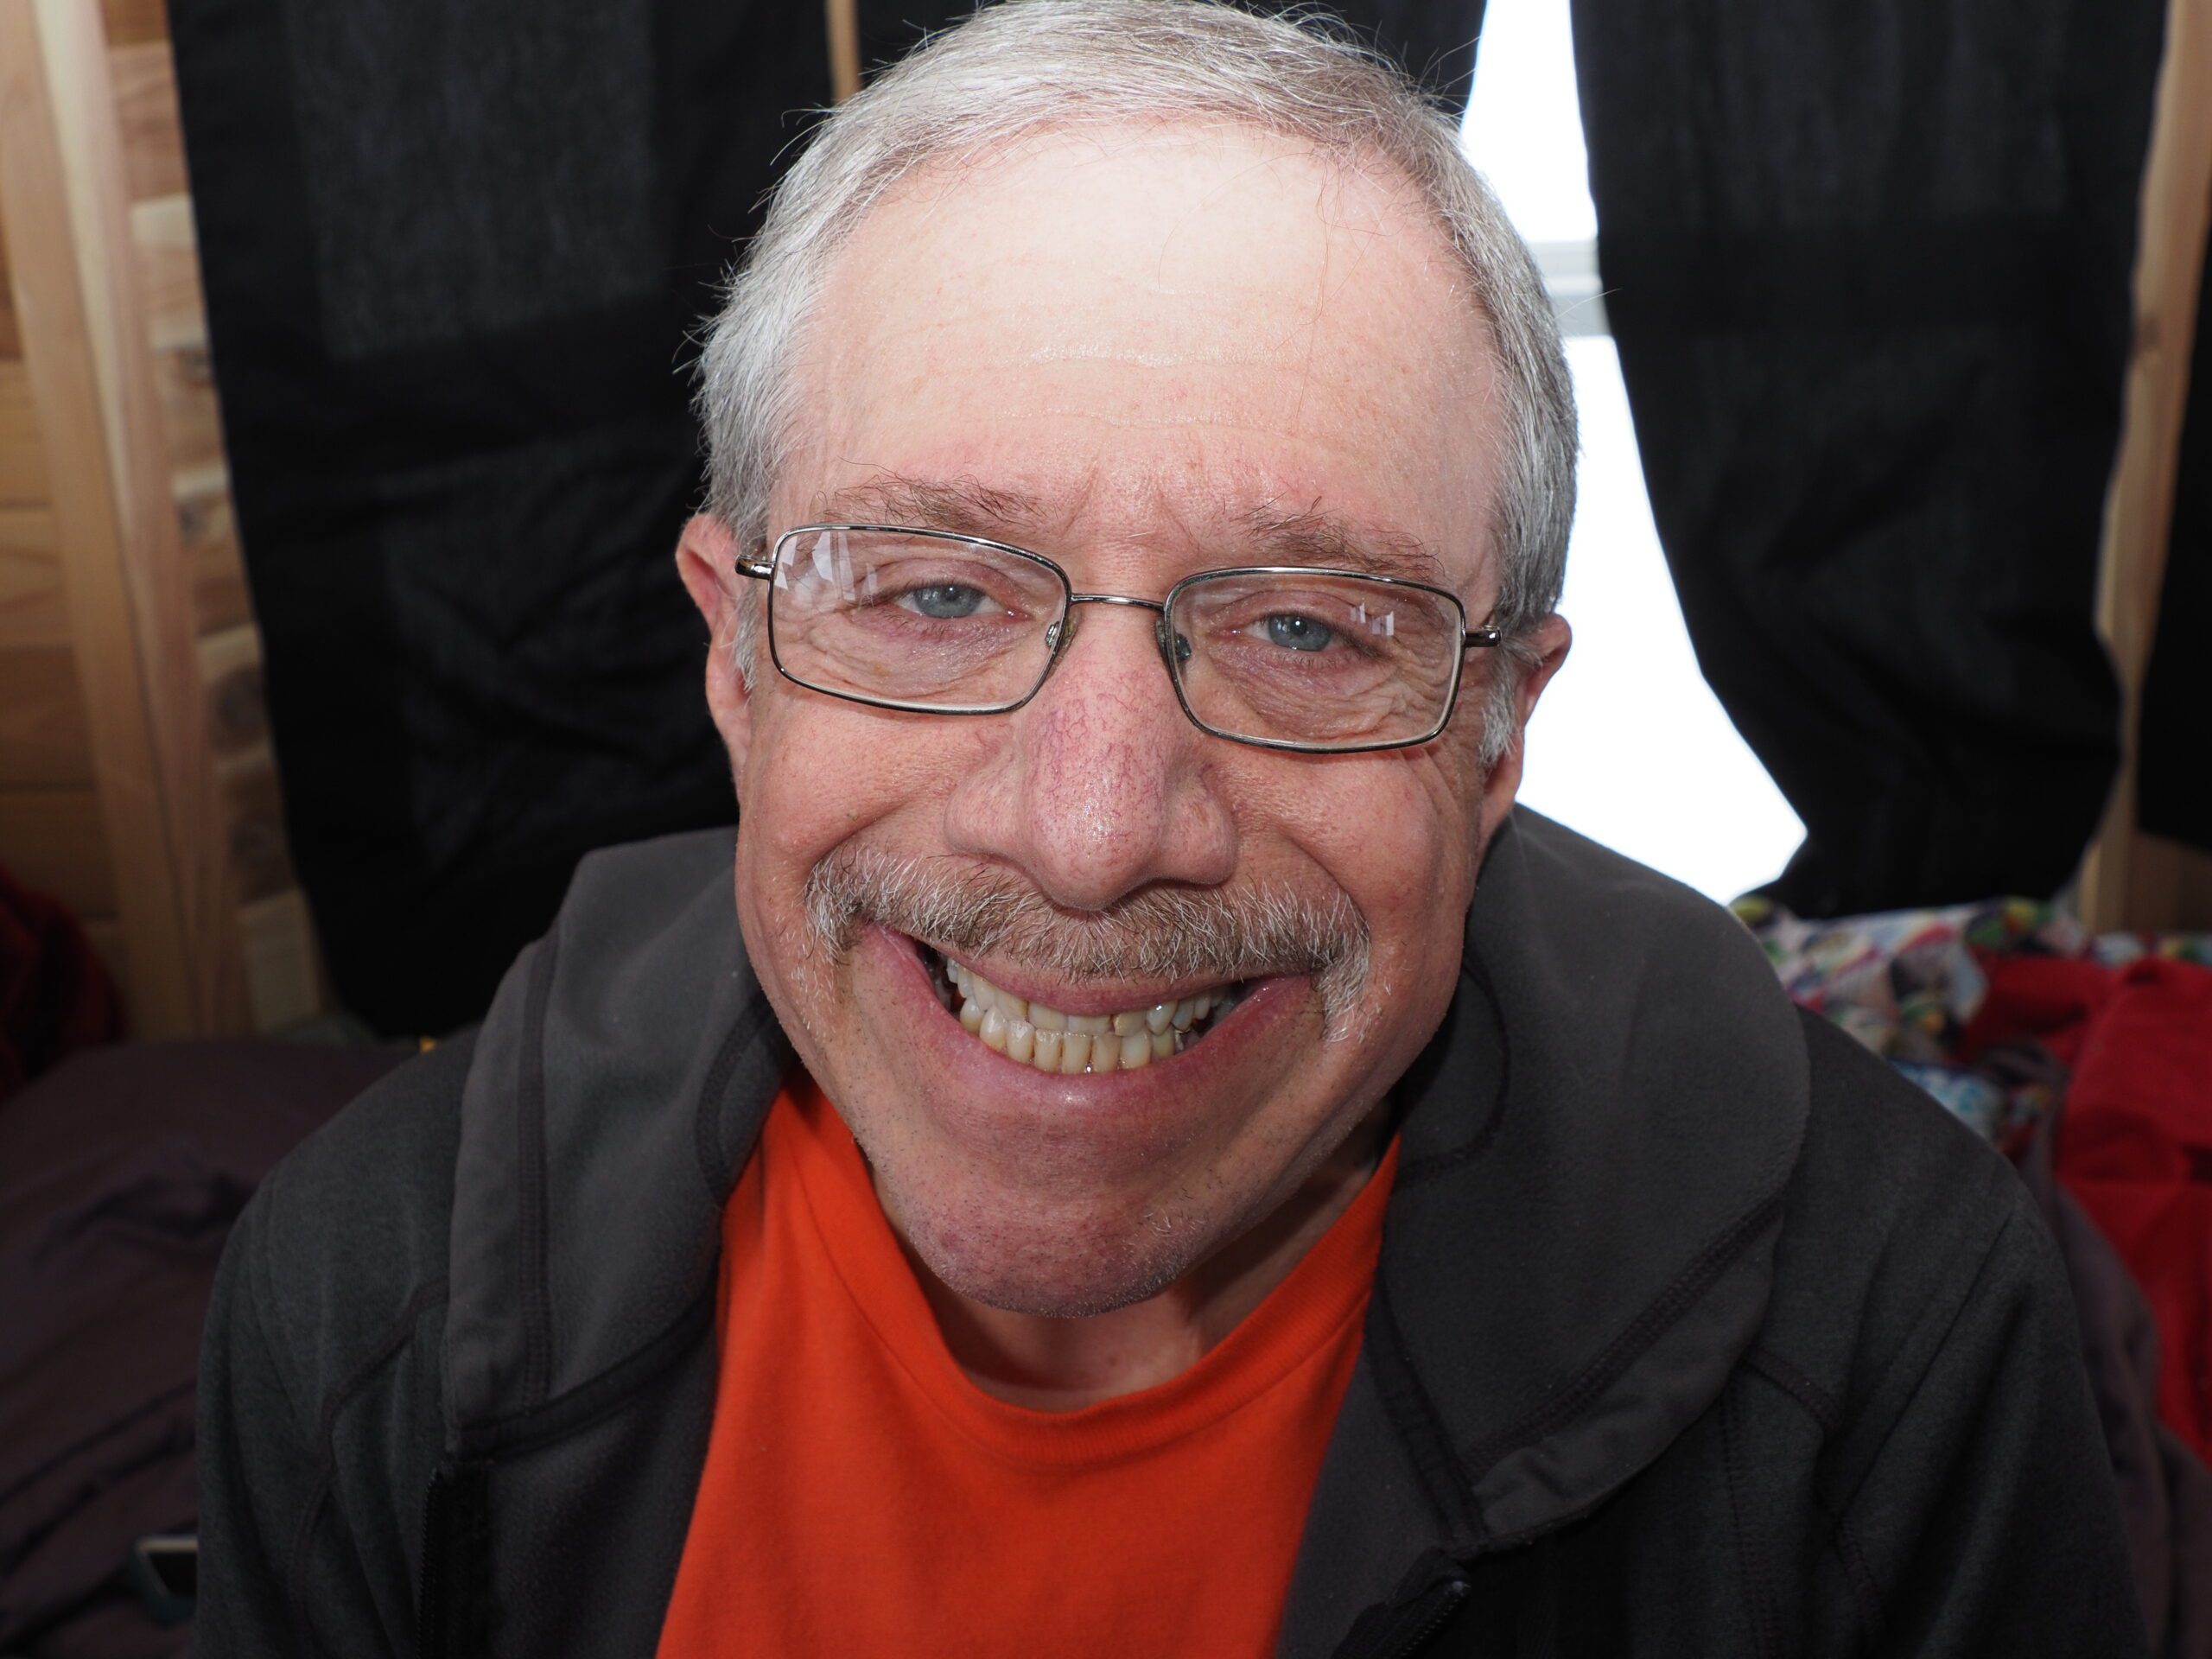 Man with glasses smiles at the camera.